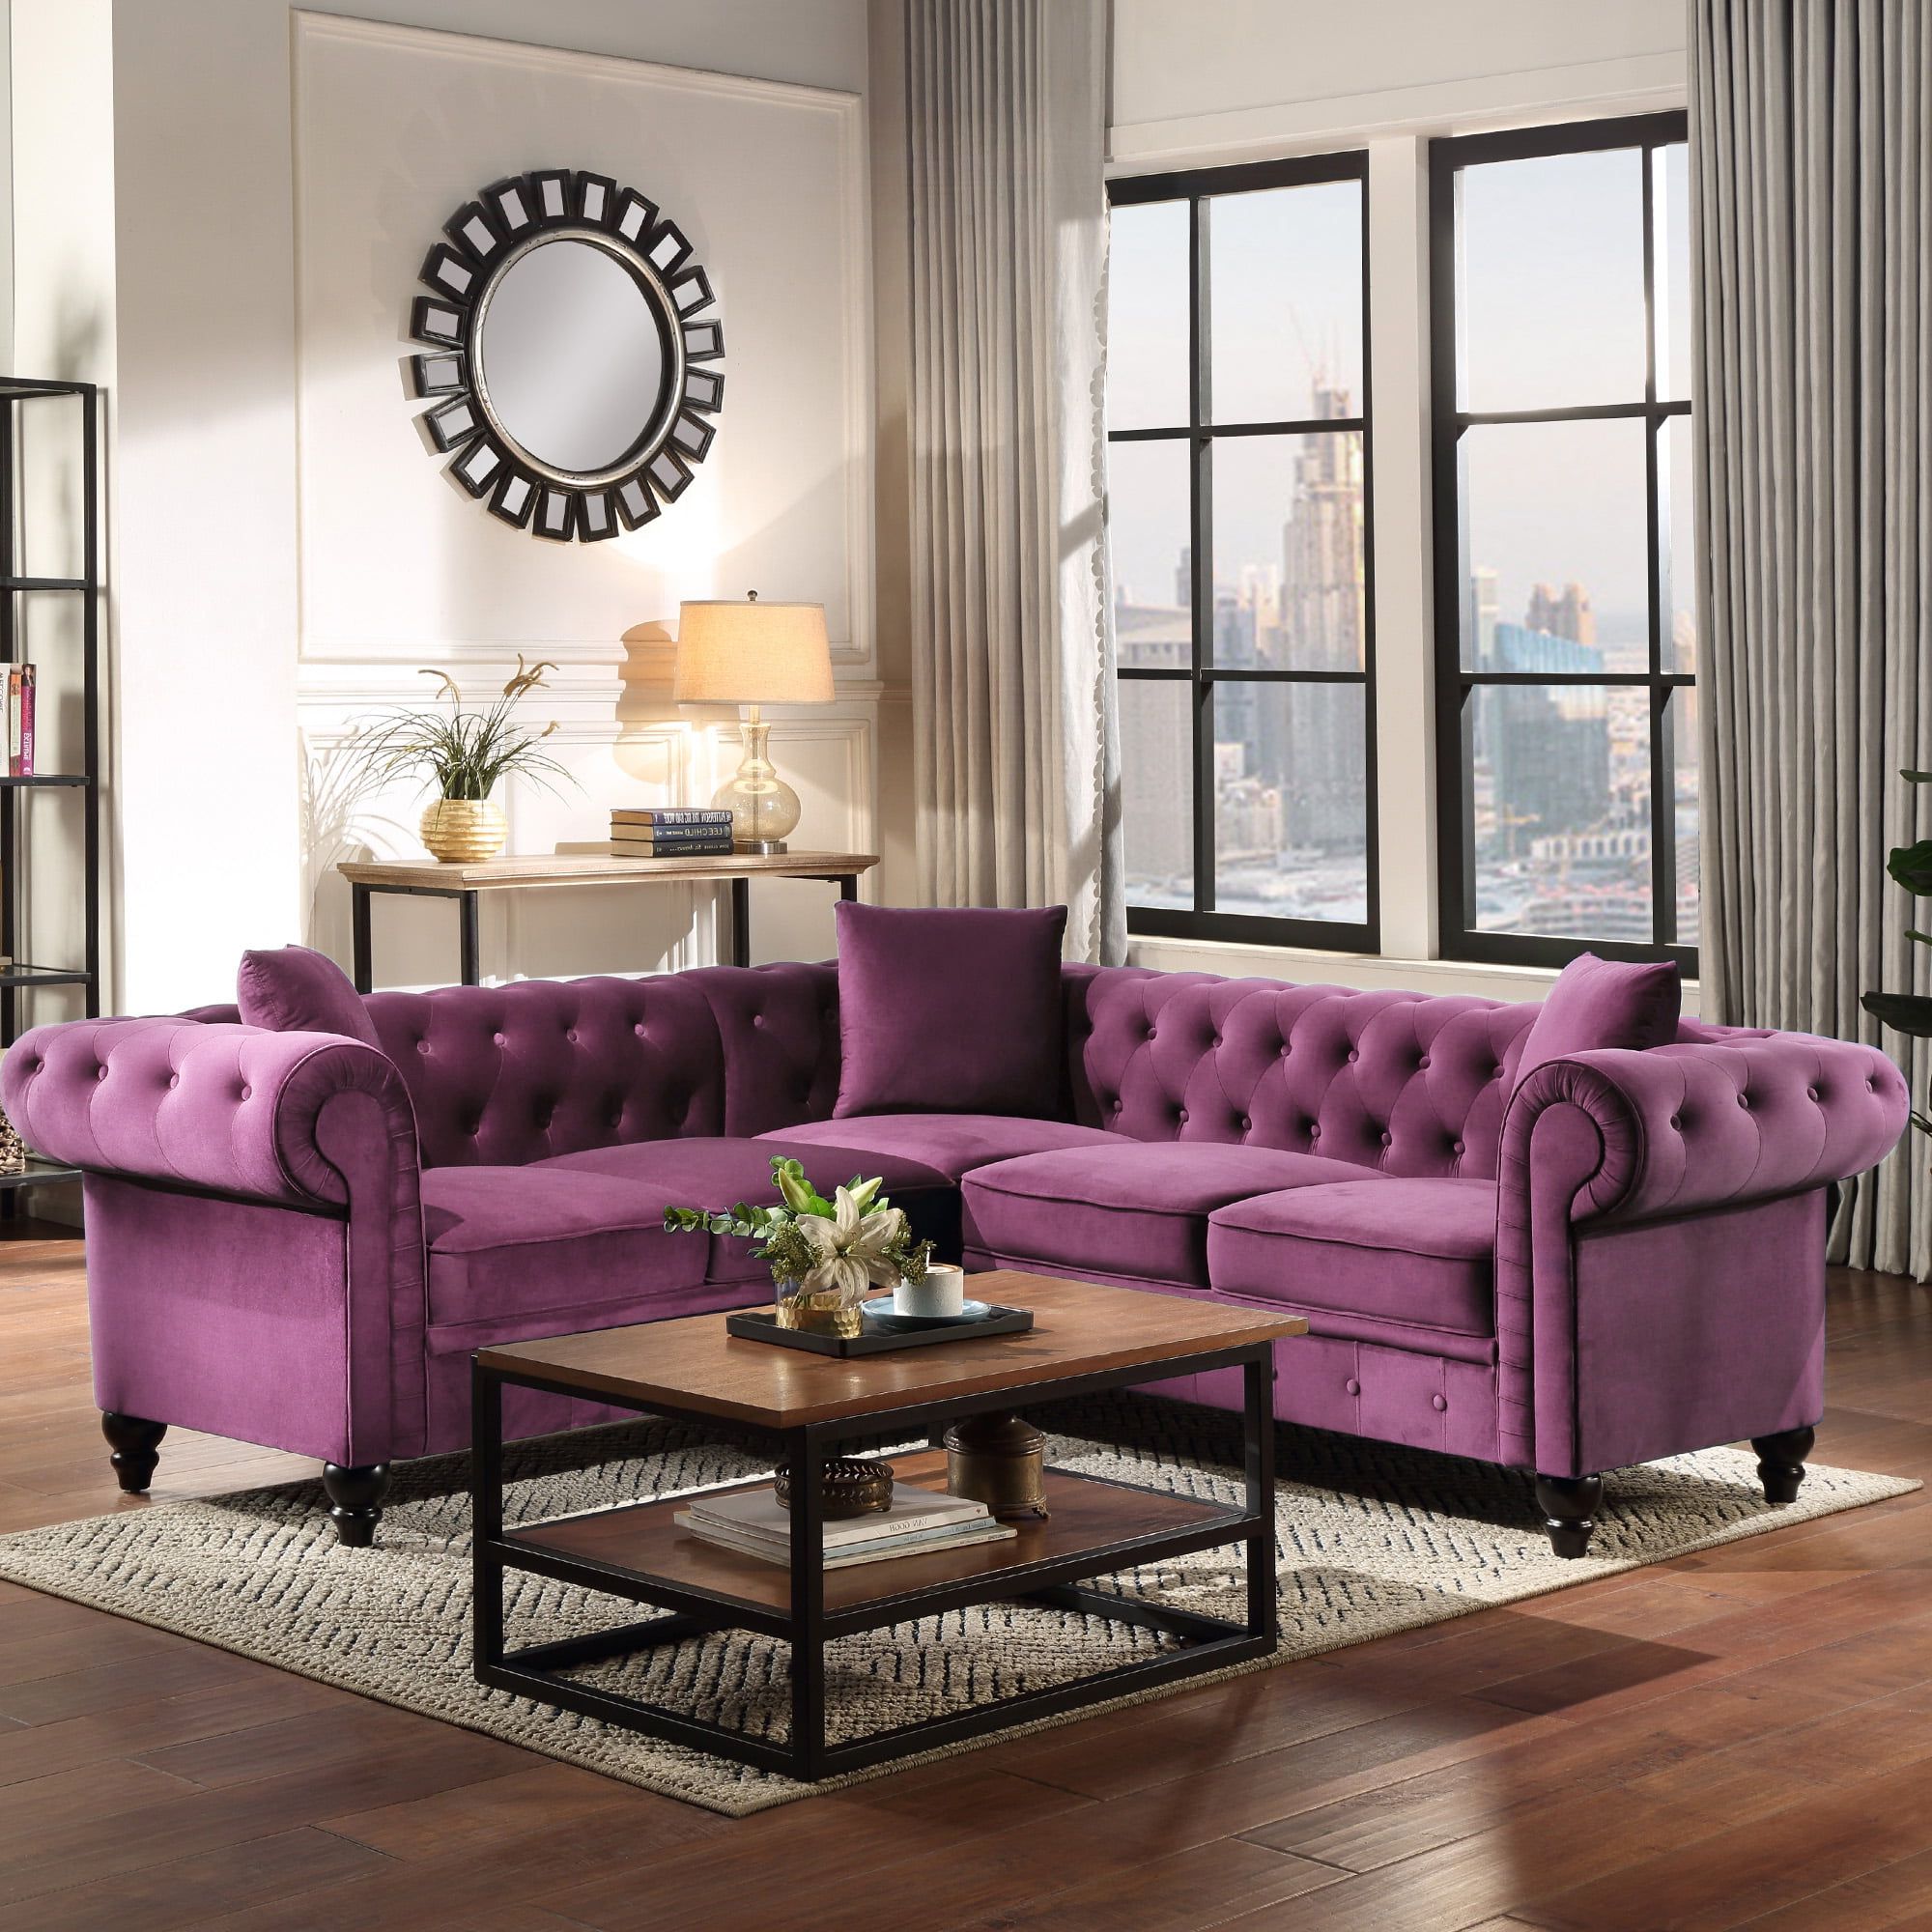 Fashionable Tufted Upholstered Sofas In High End Living Room Chesterfield Sofa, 80'' Classic Velvet Rolled Arm (View 13 of 15)